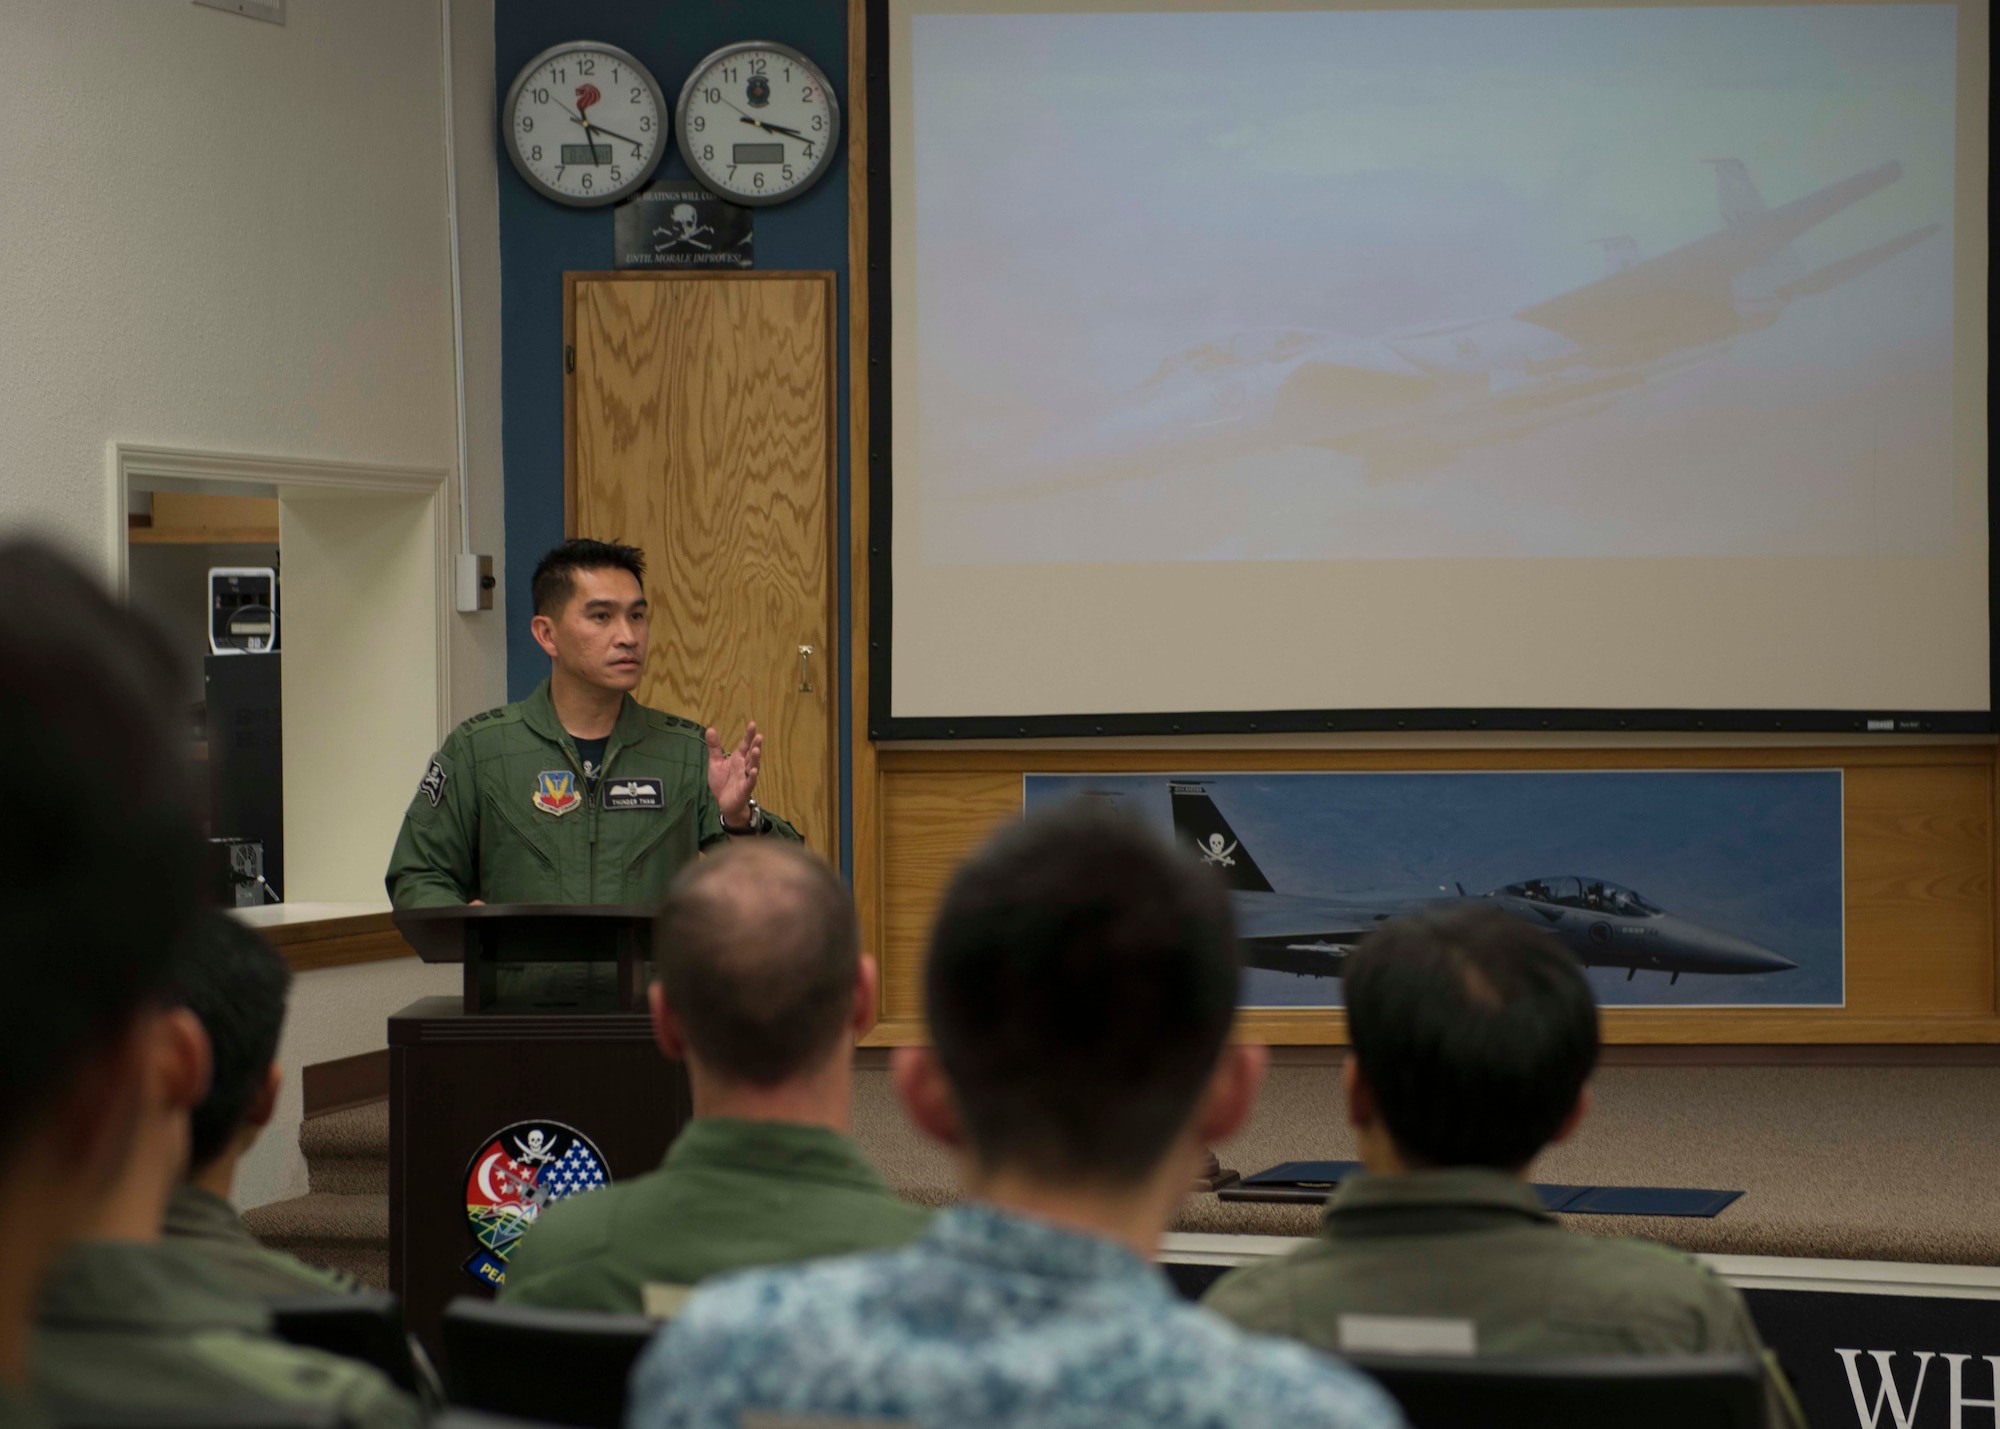 Republic of Singapore Lt. Col. Tham Yeow Min, 428th Fighter Squadron senior ranking officer, speaks during the F-15SG Fighter Weapons Instructor Course graduation Aug. 19, 2016, at Mountain Home Air Force Base, Idaho. The course was the first of its kind for the RSAF, and was modeled after the U.S. Air Force's weapons school. (U.S. Air Force photo by Airman 1st Class Chester Mientkiewicz/Released)